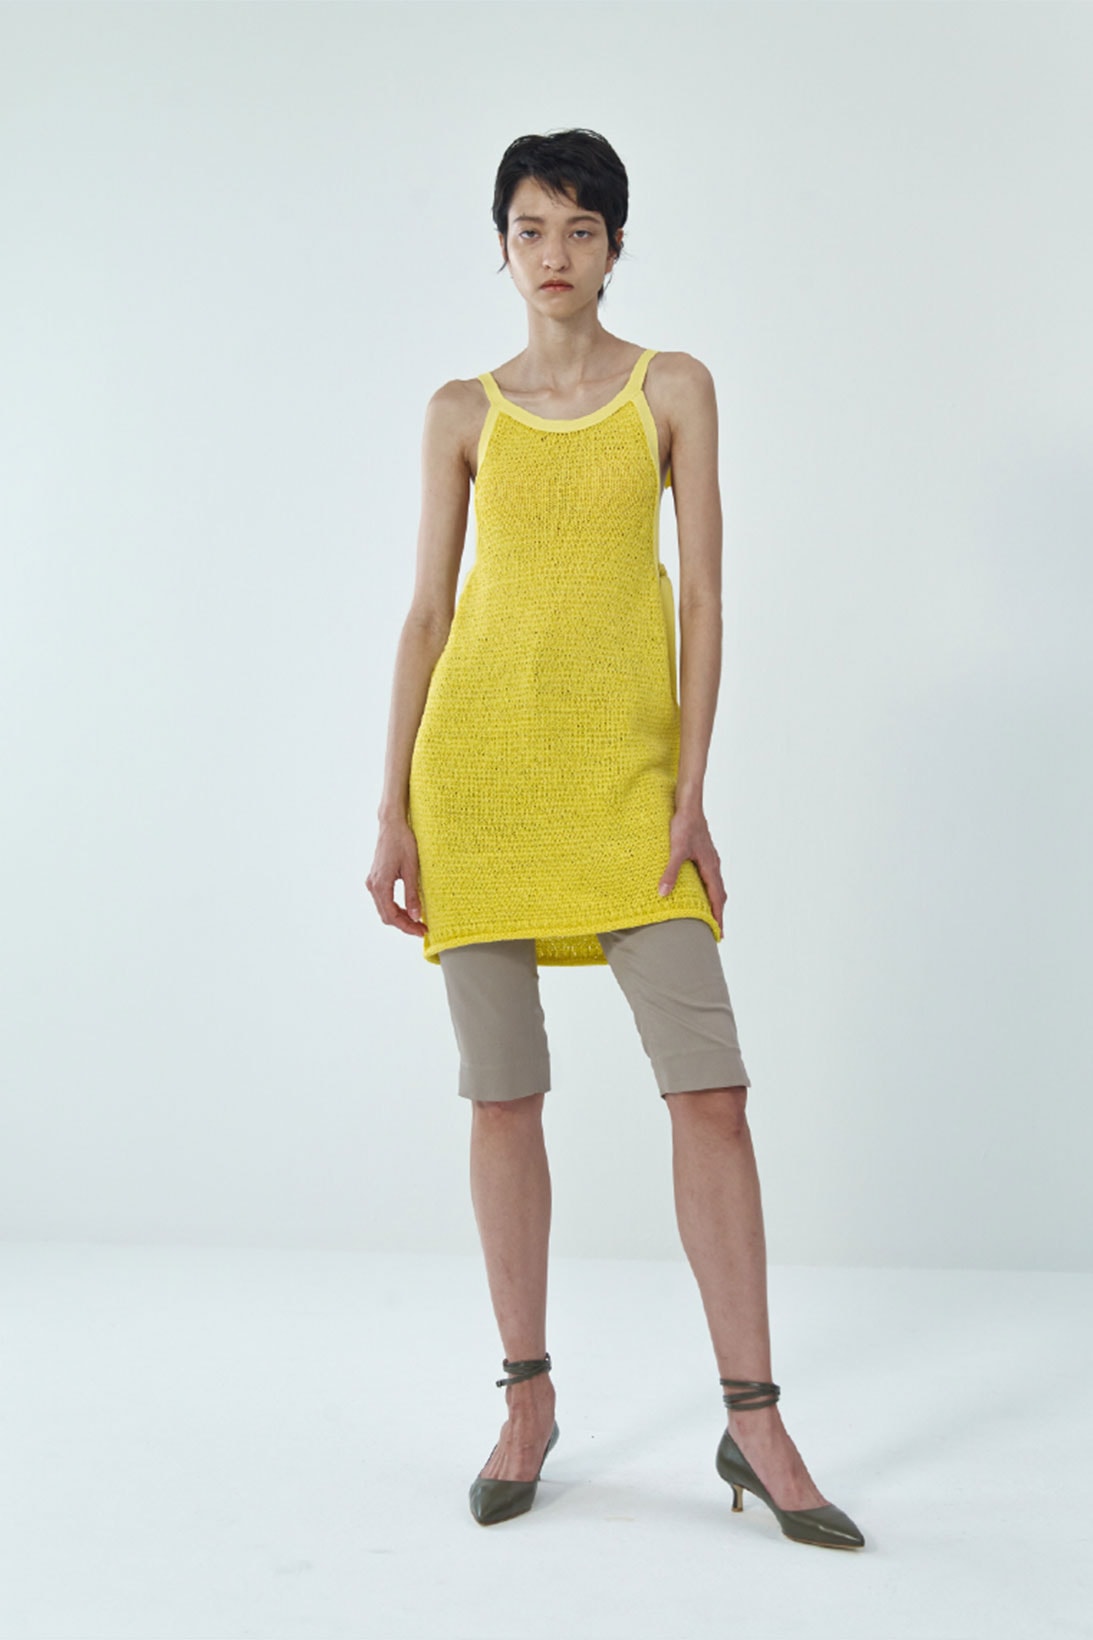 theopen product spring summer 2021 ss21 collection lookbook yellow top shorts